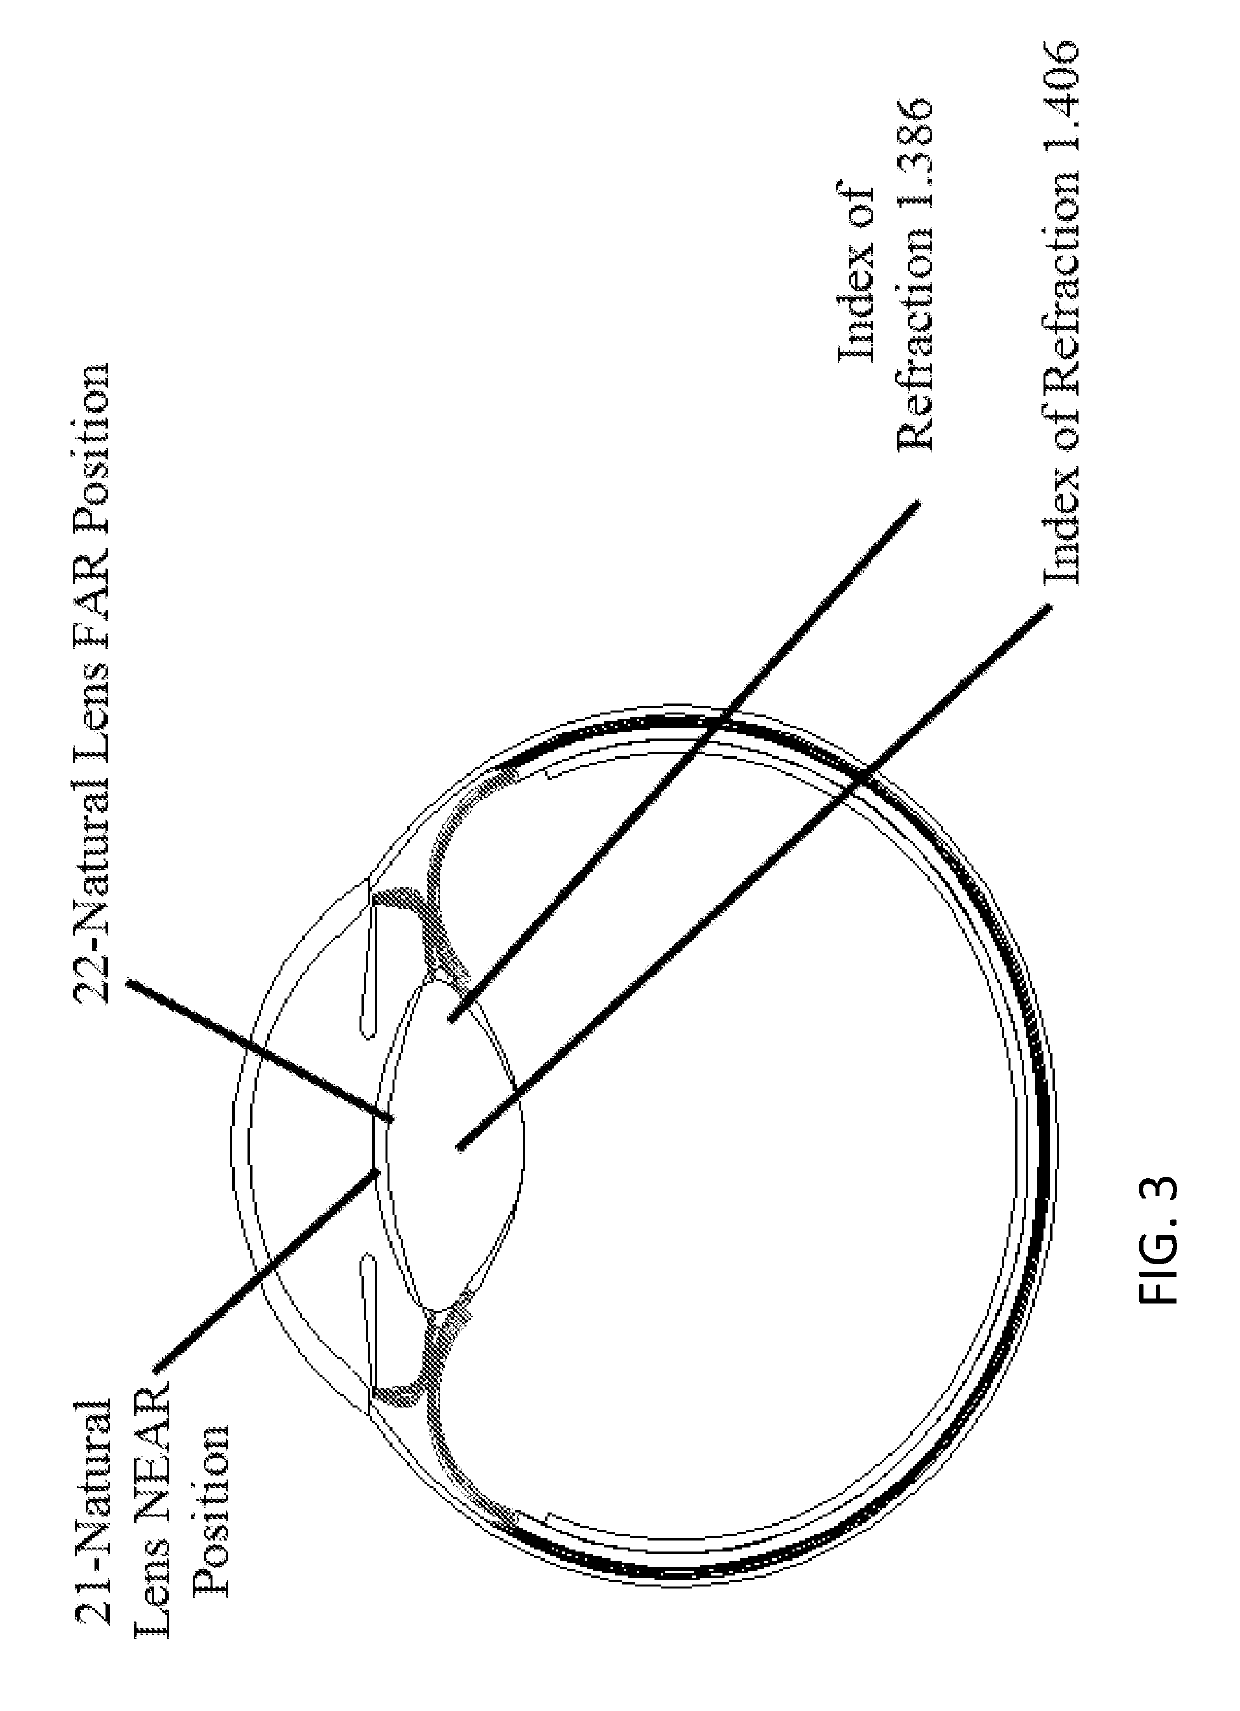 Accommodative intraocular lens that ejects post capsular opacification and self-centers